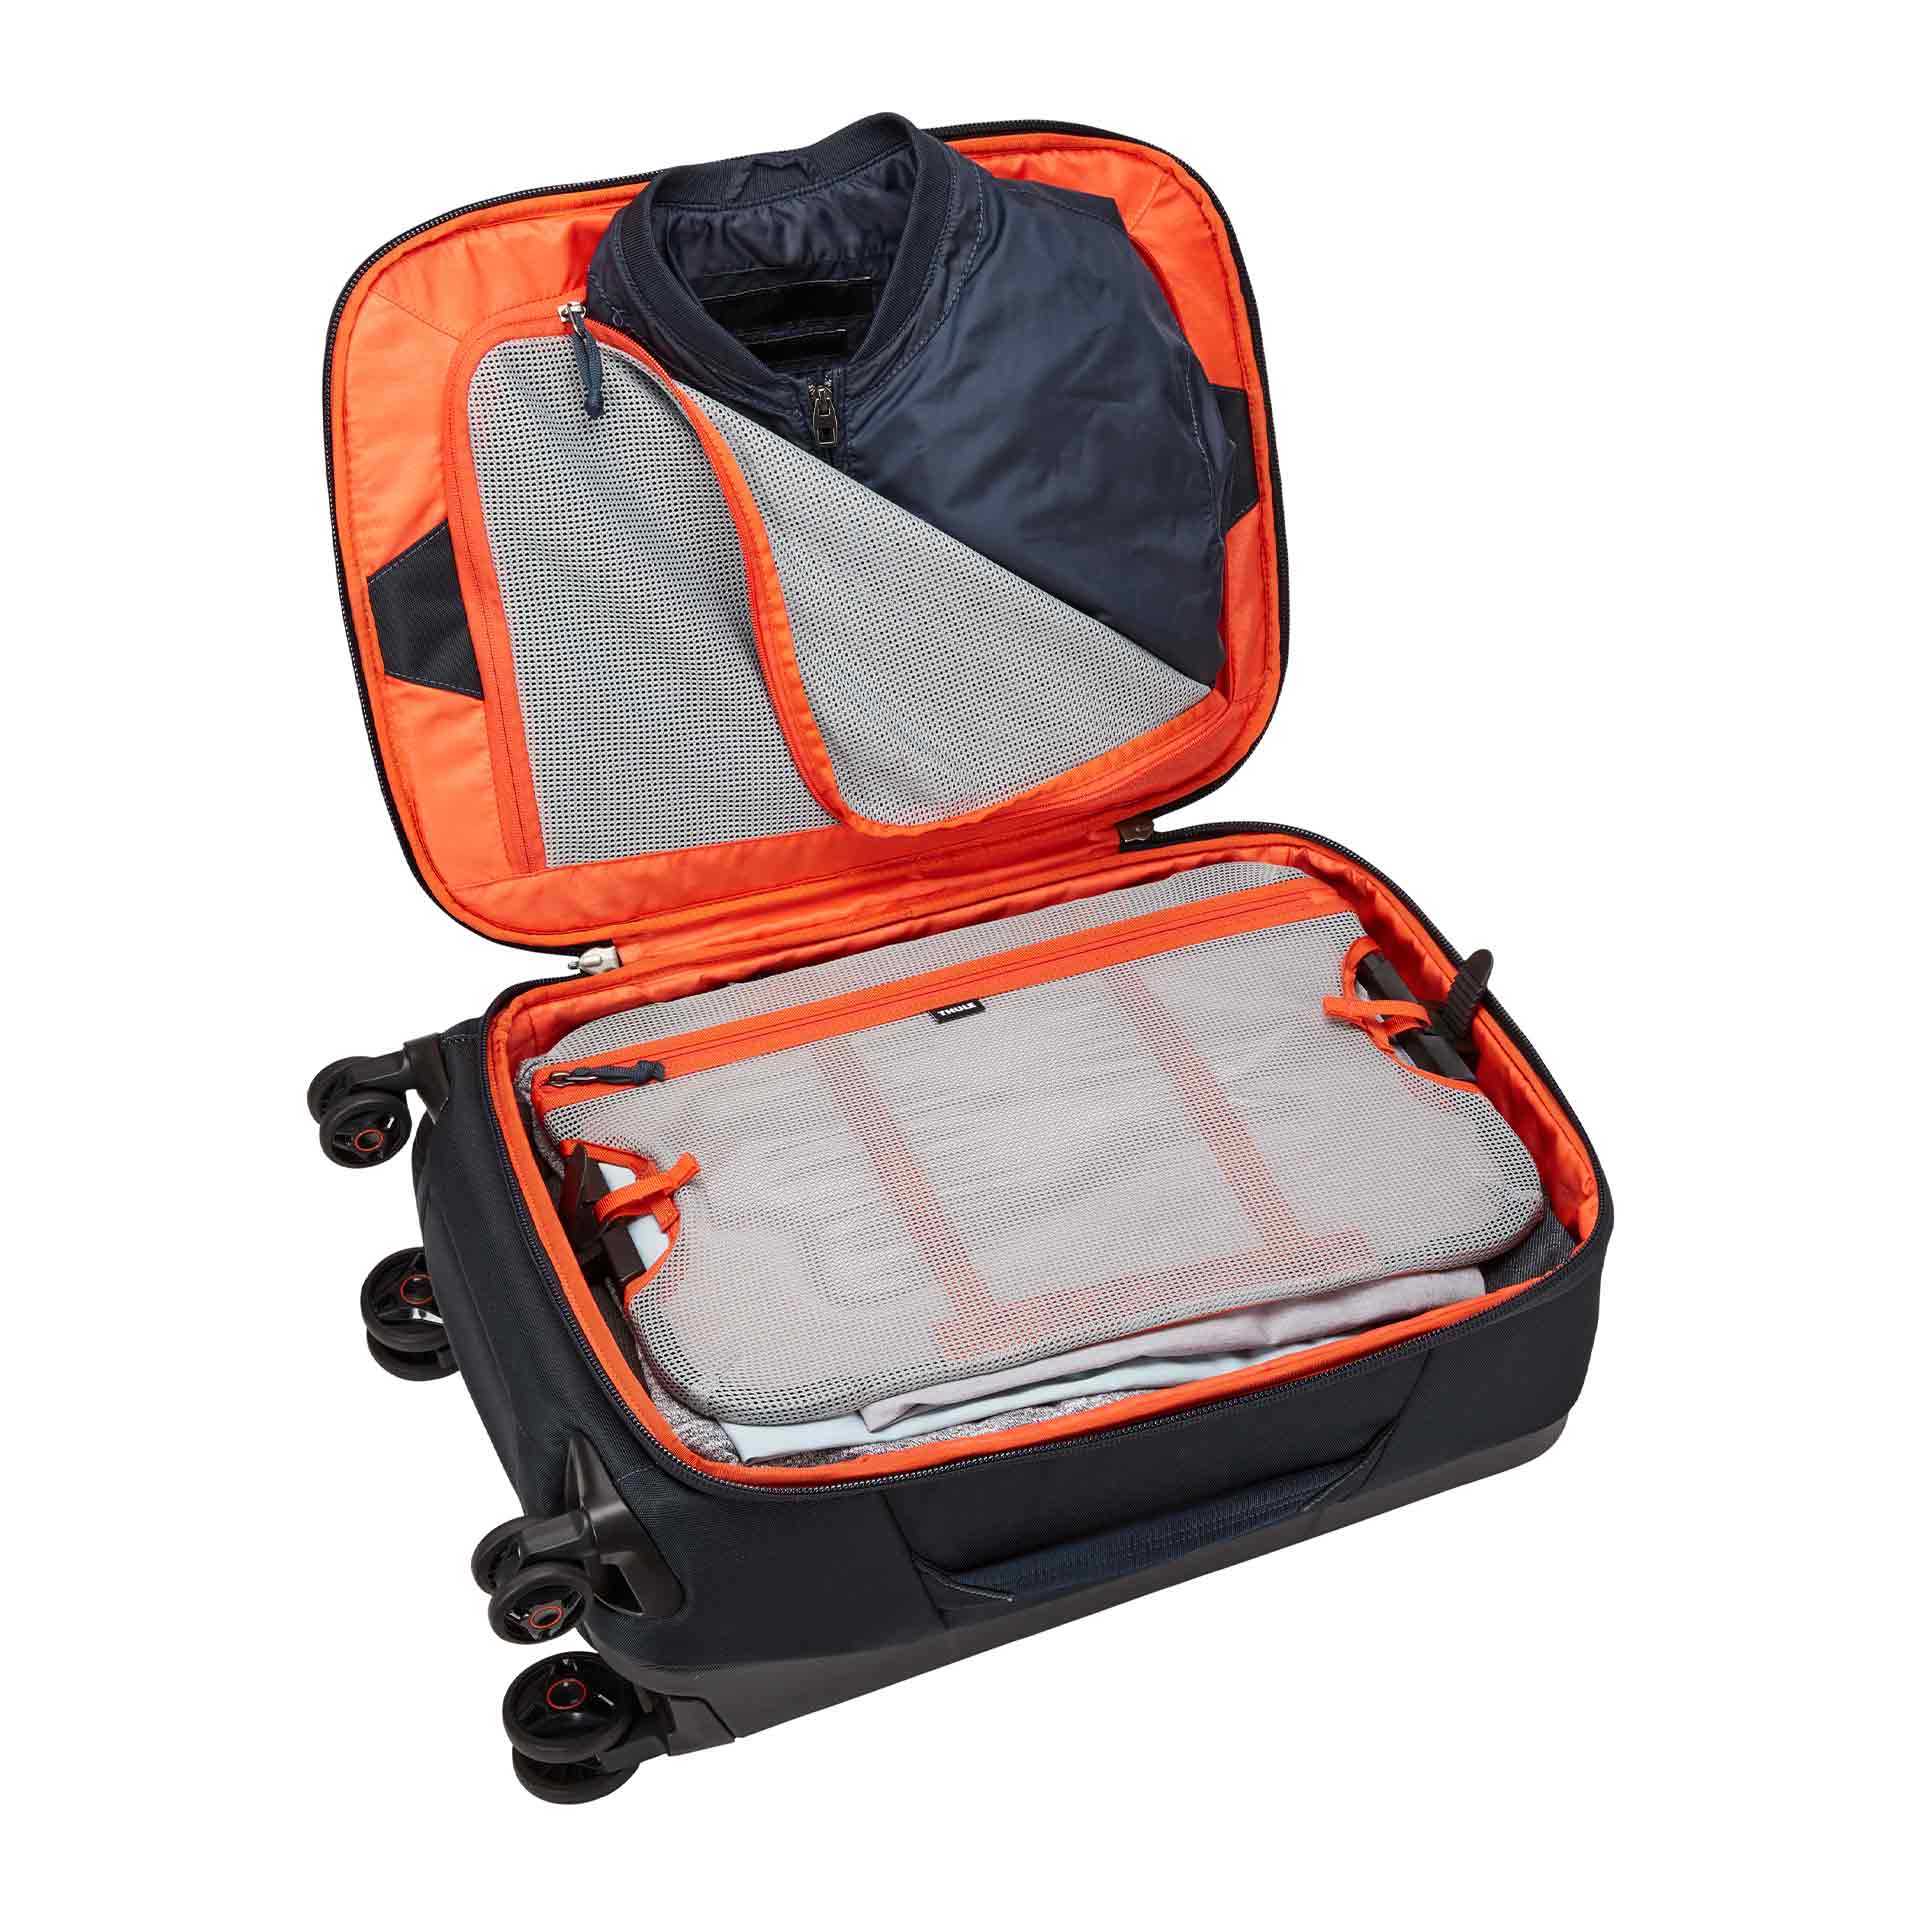 Thule Subterra Carry-On 4-Rad Trolley S mineral